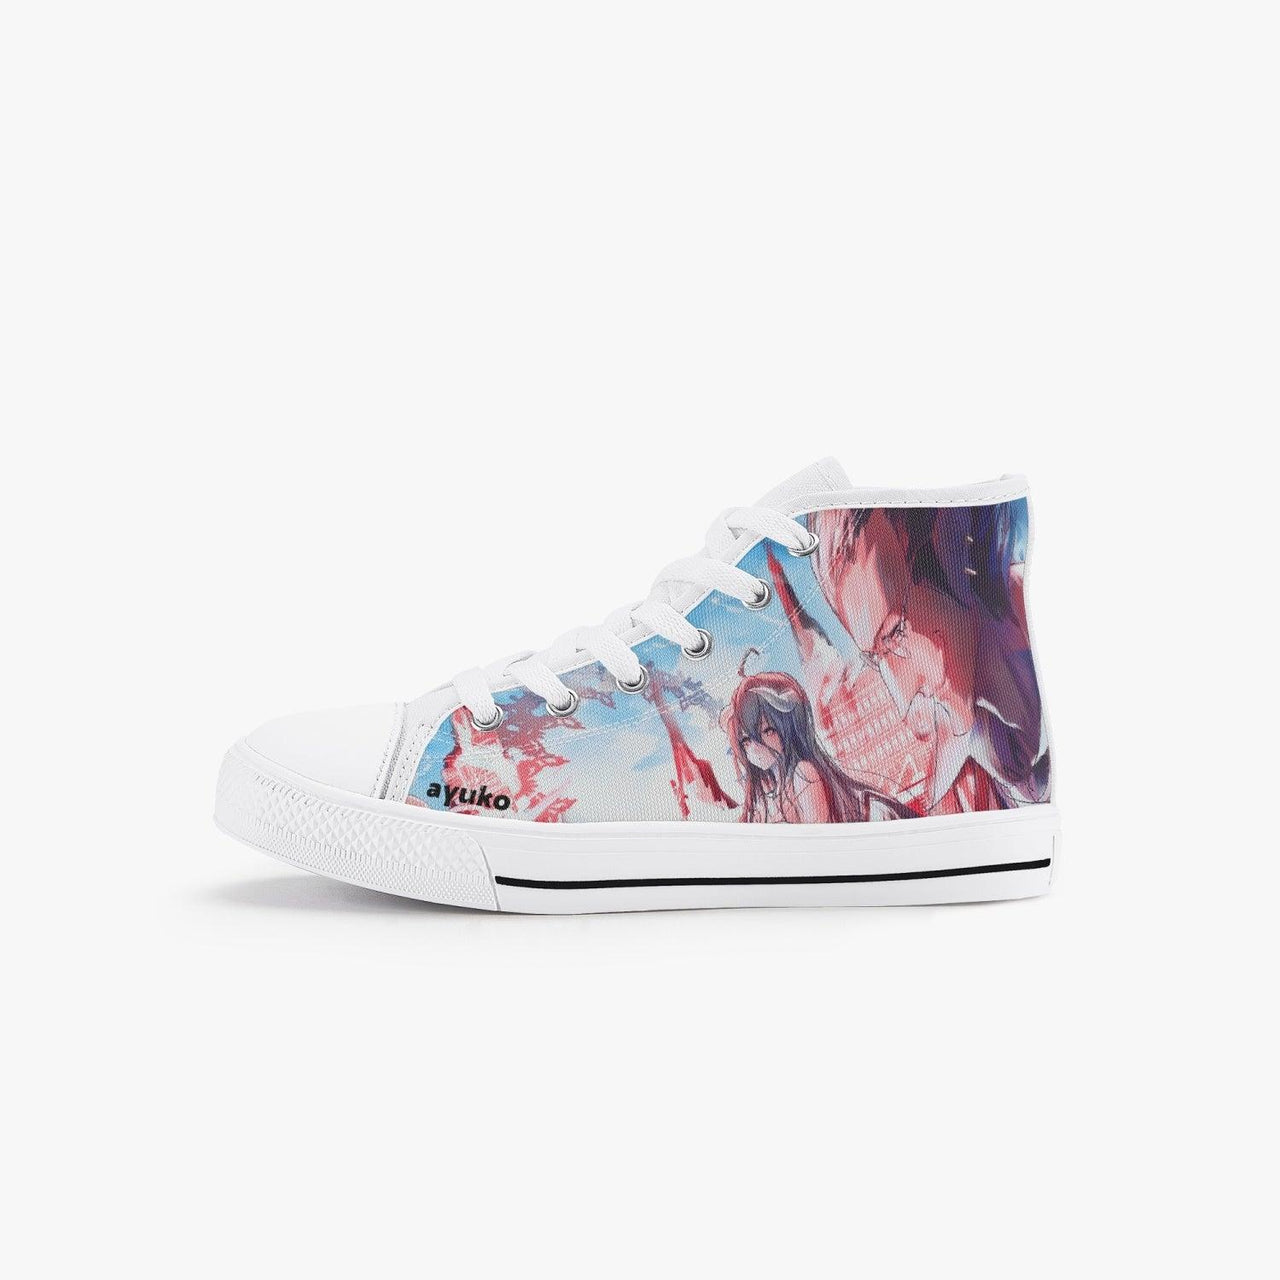 Overlord Kids A-Star High Anime Shoes _ Overlord _ Ayuko